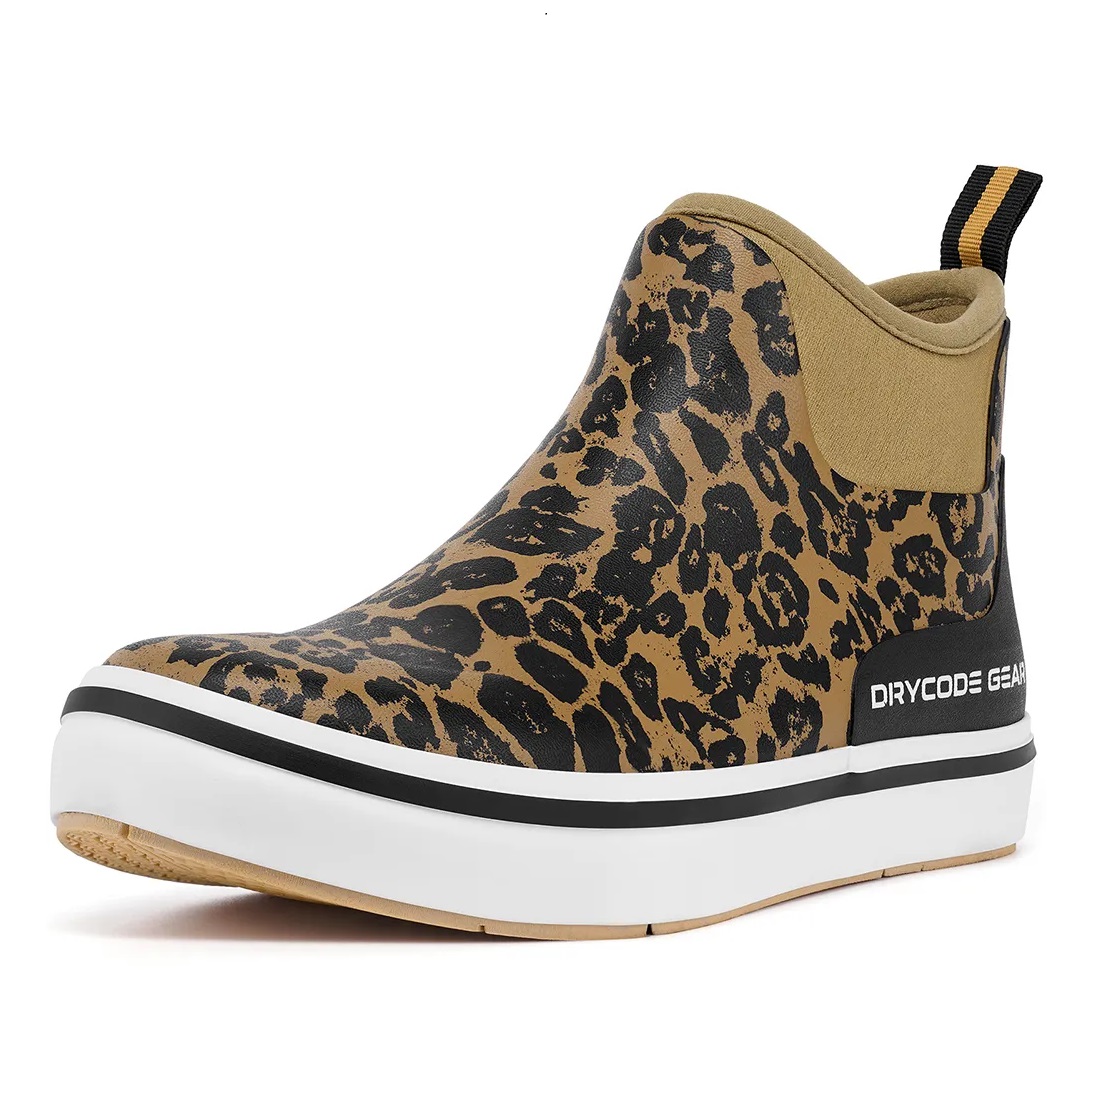 DRYCODE Deck Fishing Boots （Leopard Print）, Anti-Slip Rubber Ankle Boots